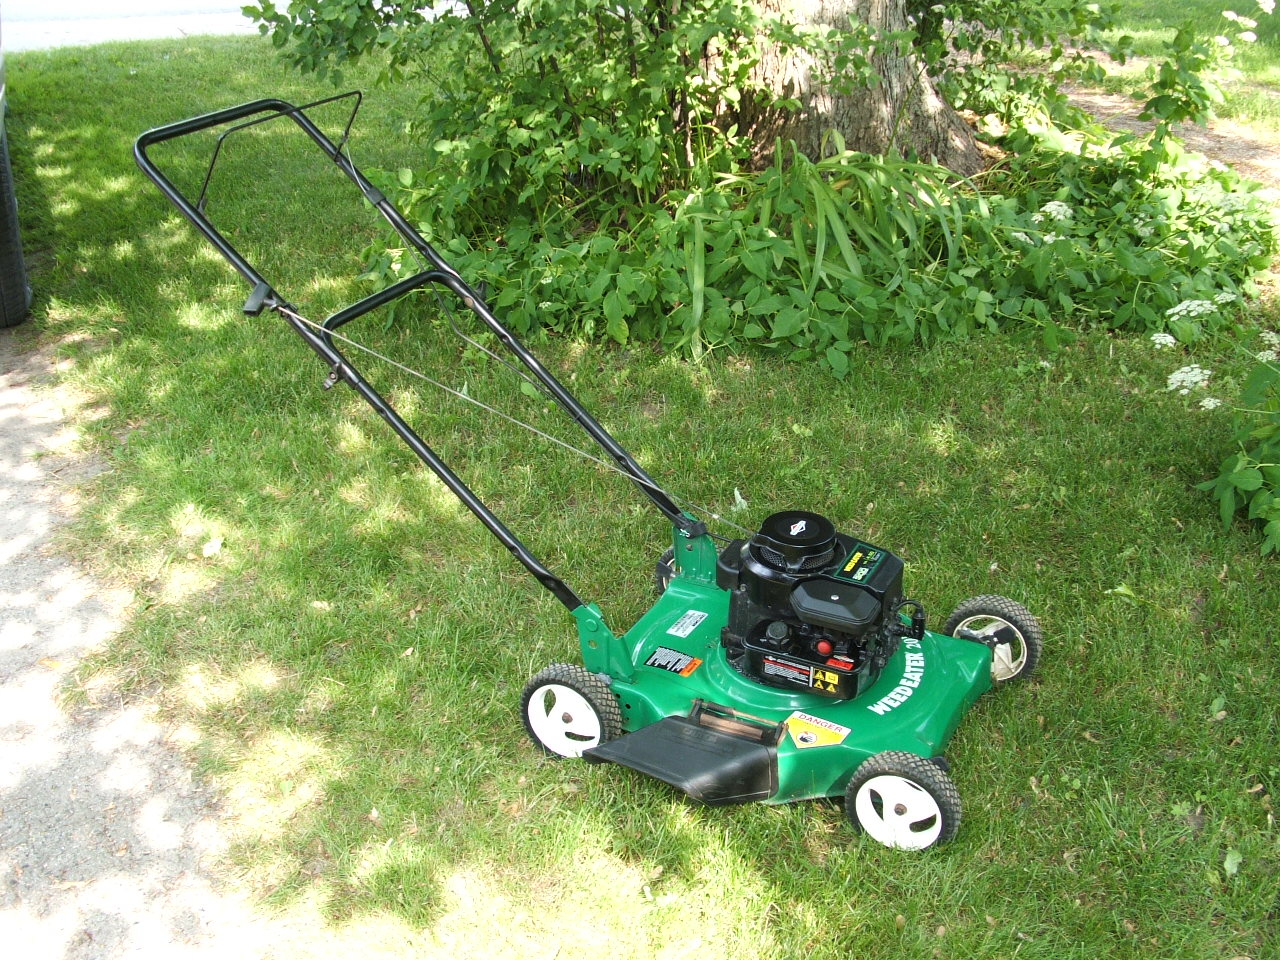 Weed Eater Briggs & Stratton Lawn Mower